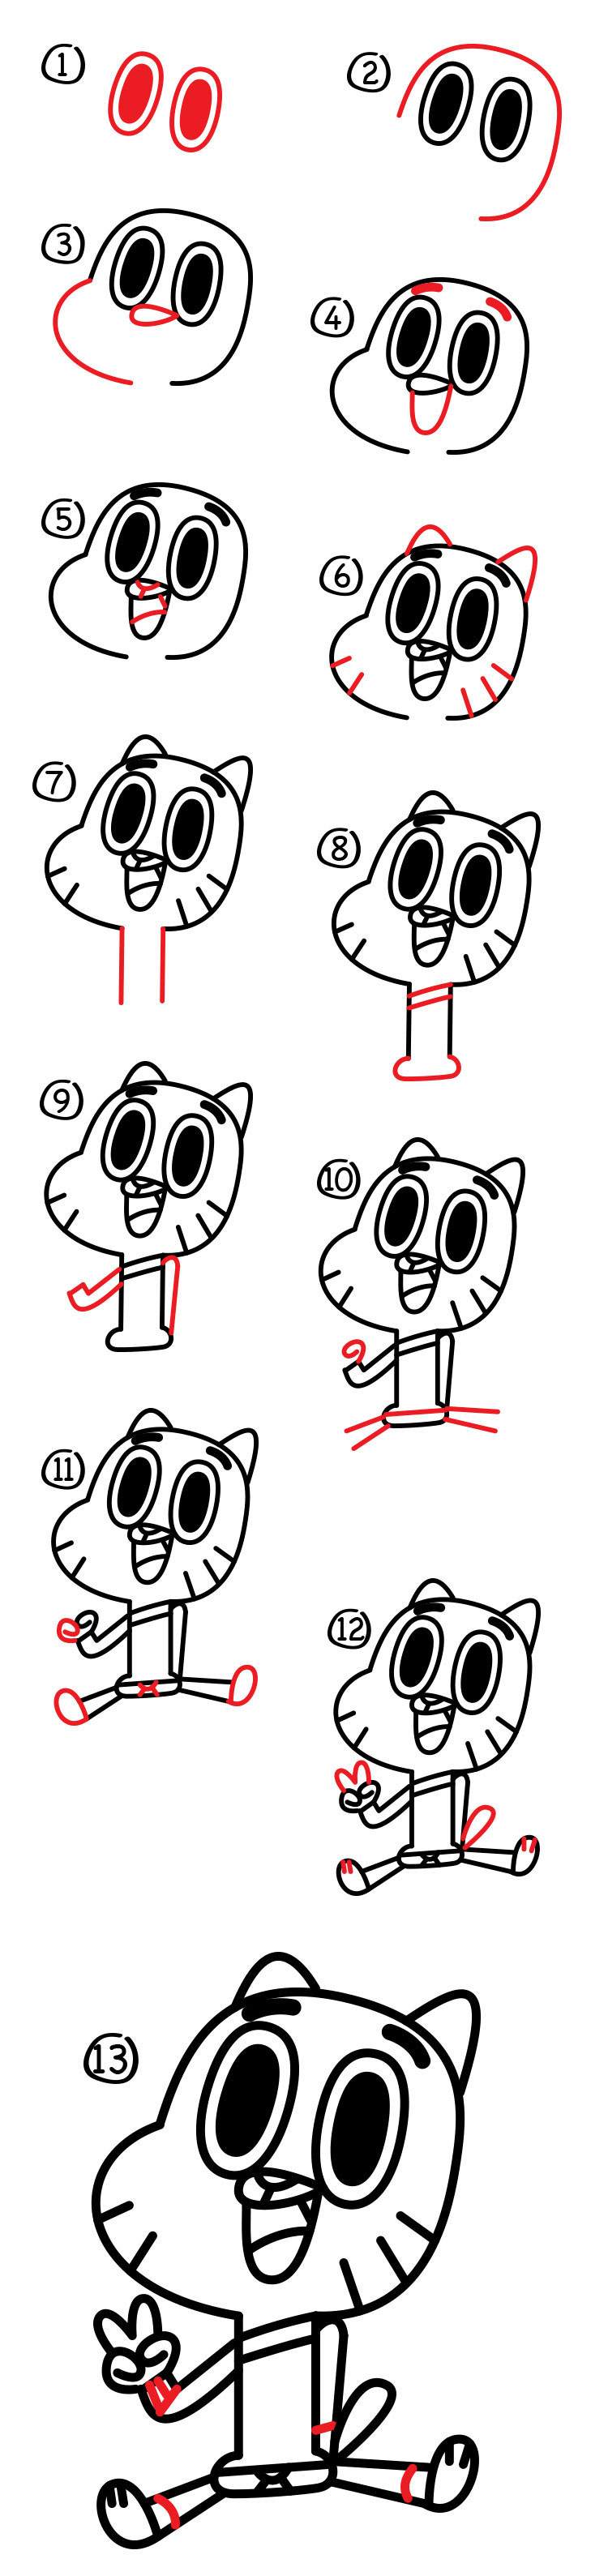 How To Draw Gumball - Art For Kids Hub